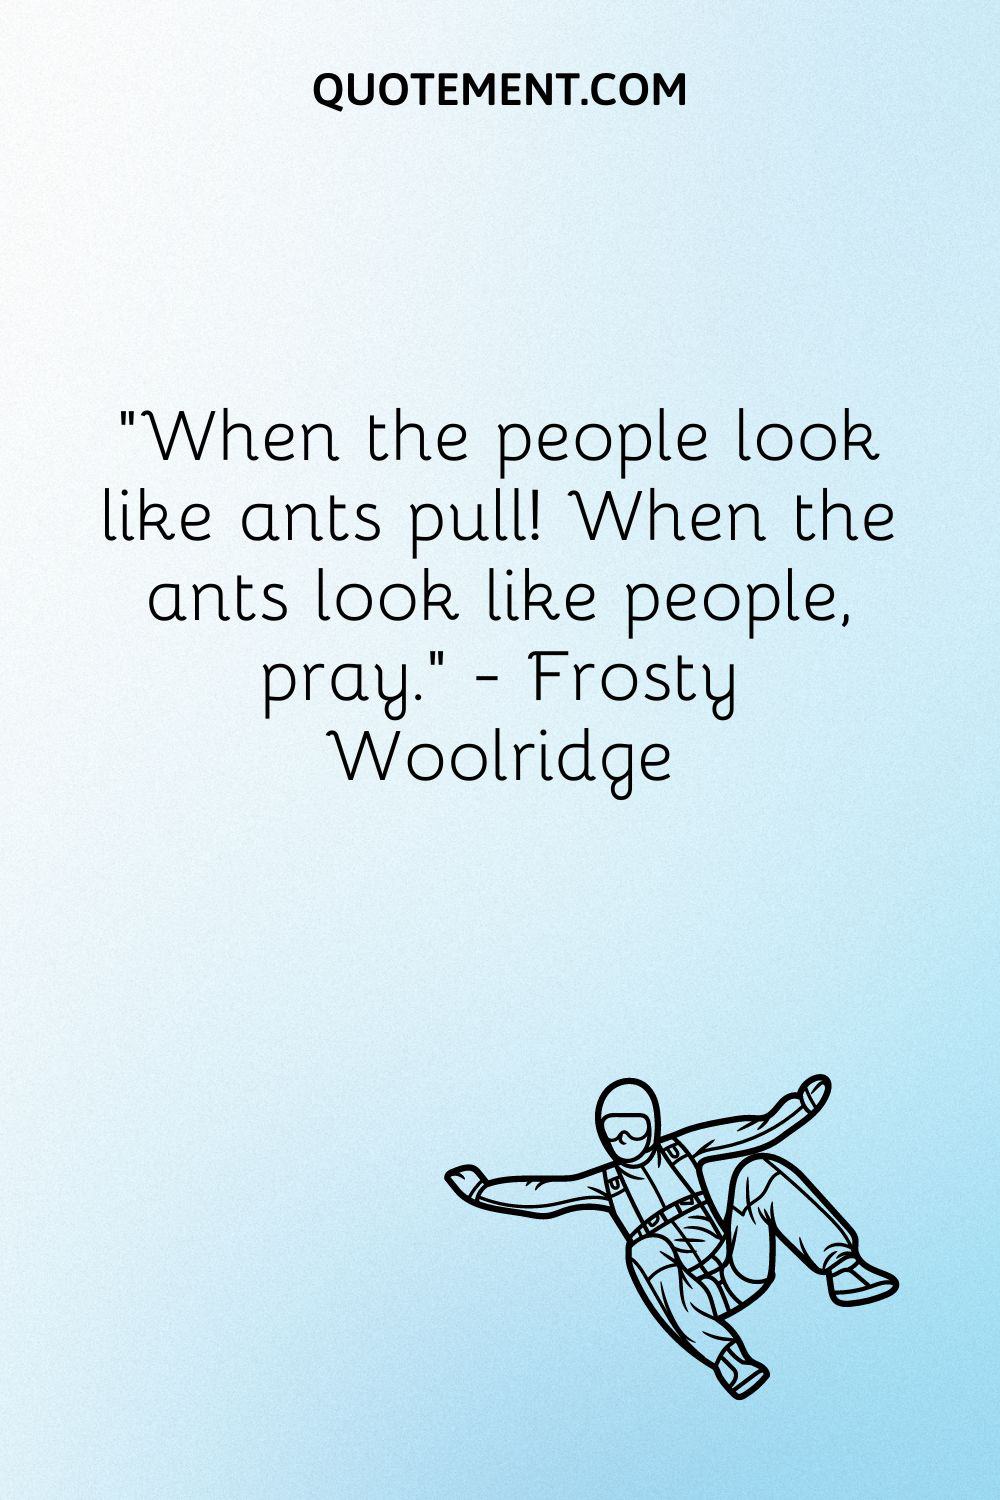 When the people look like ants pull! When the ants look like people, pray